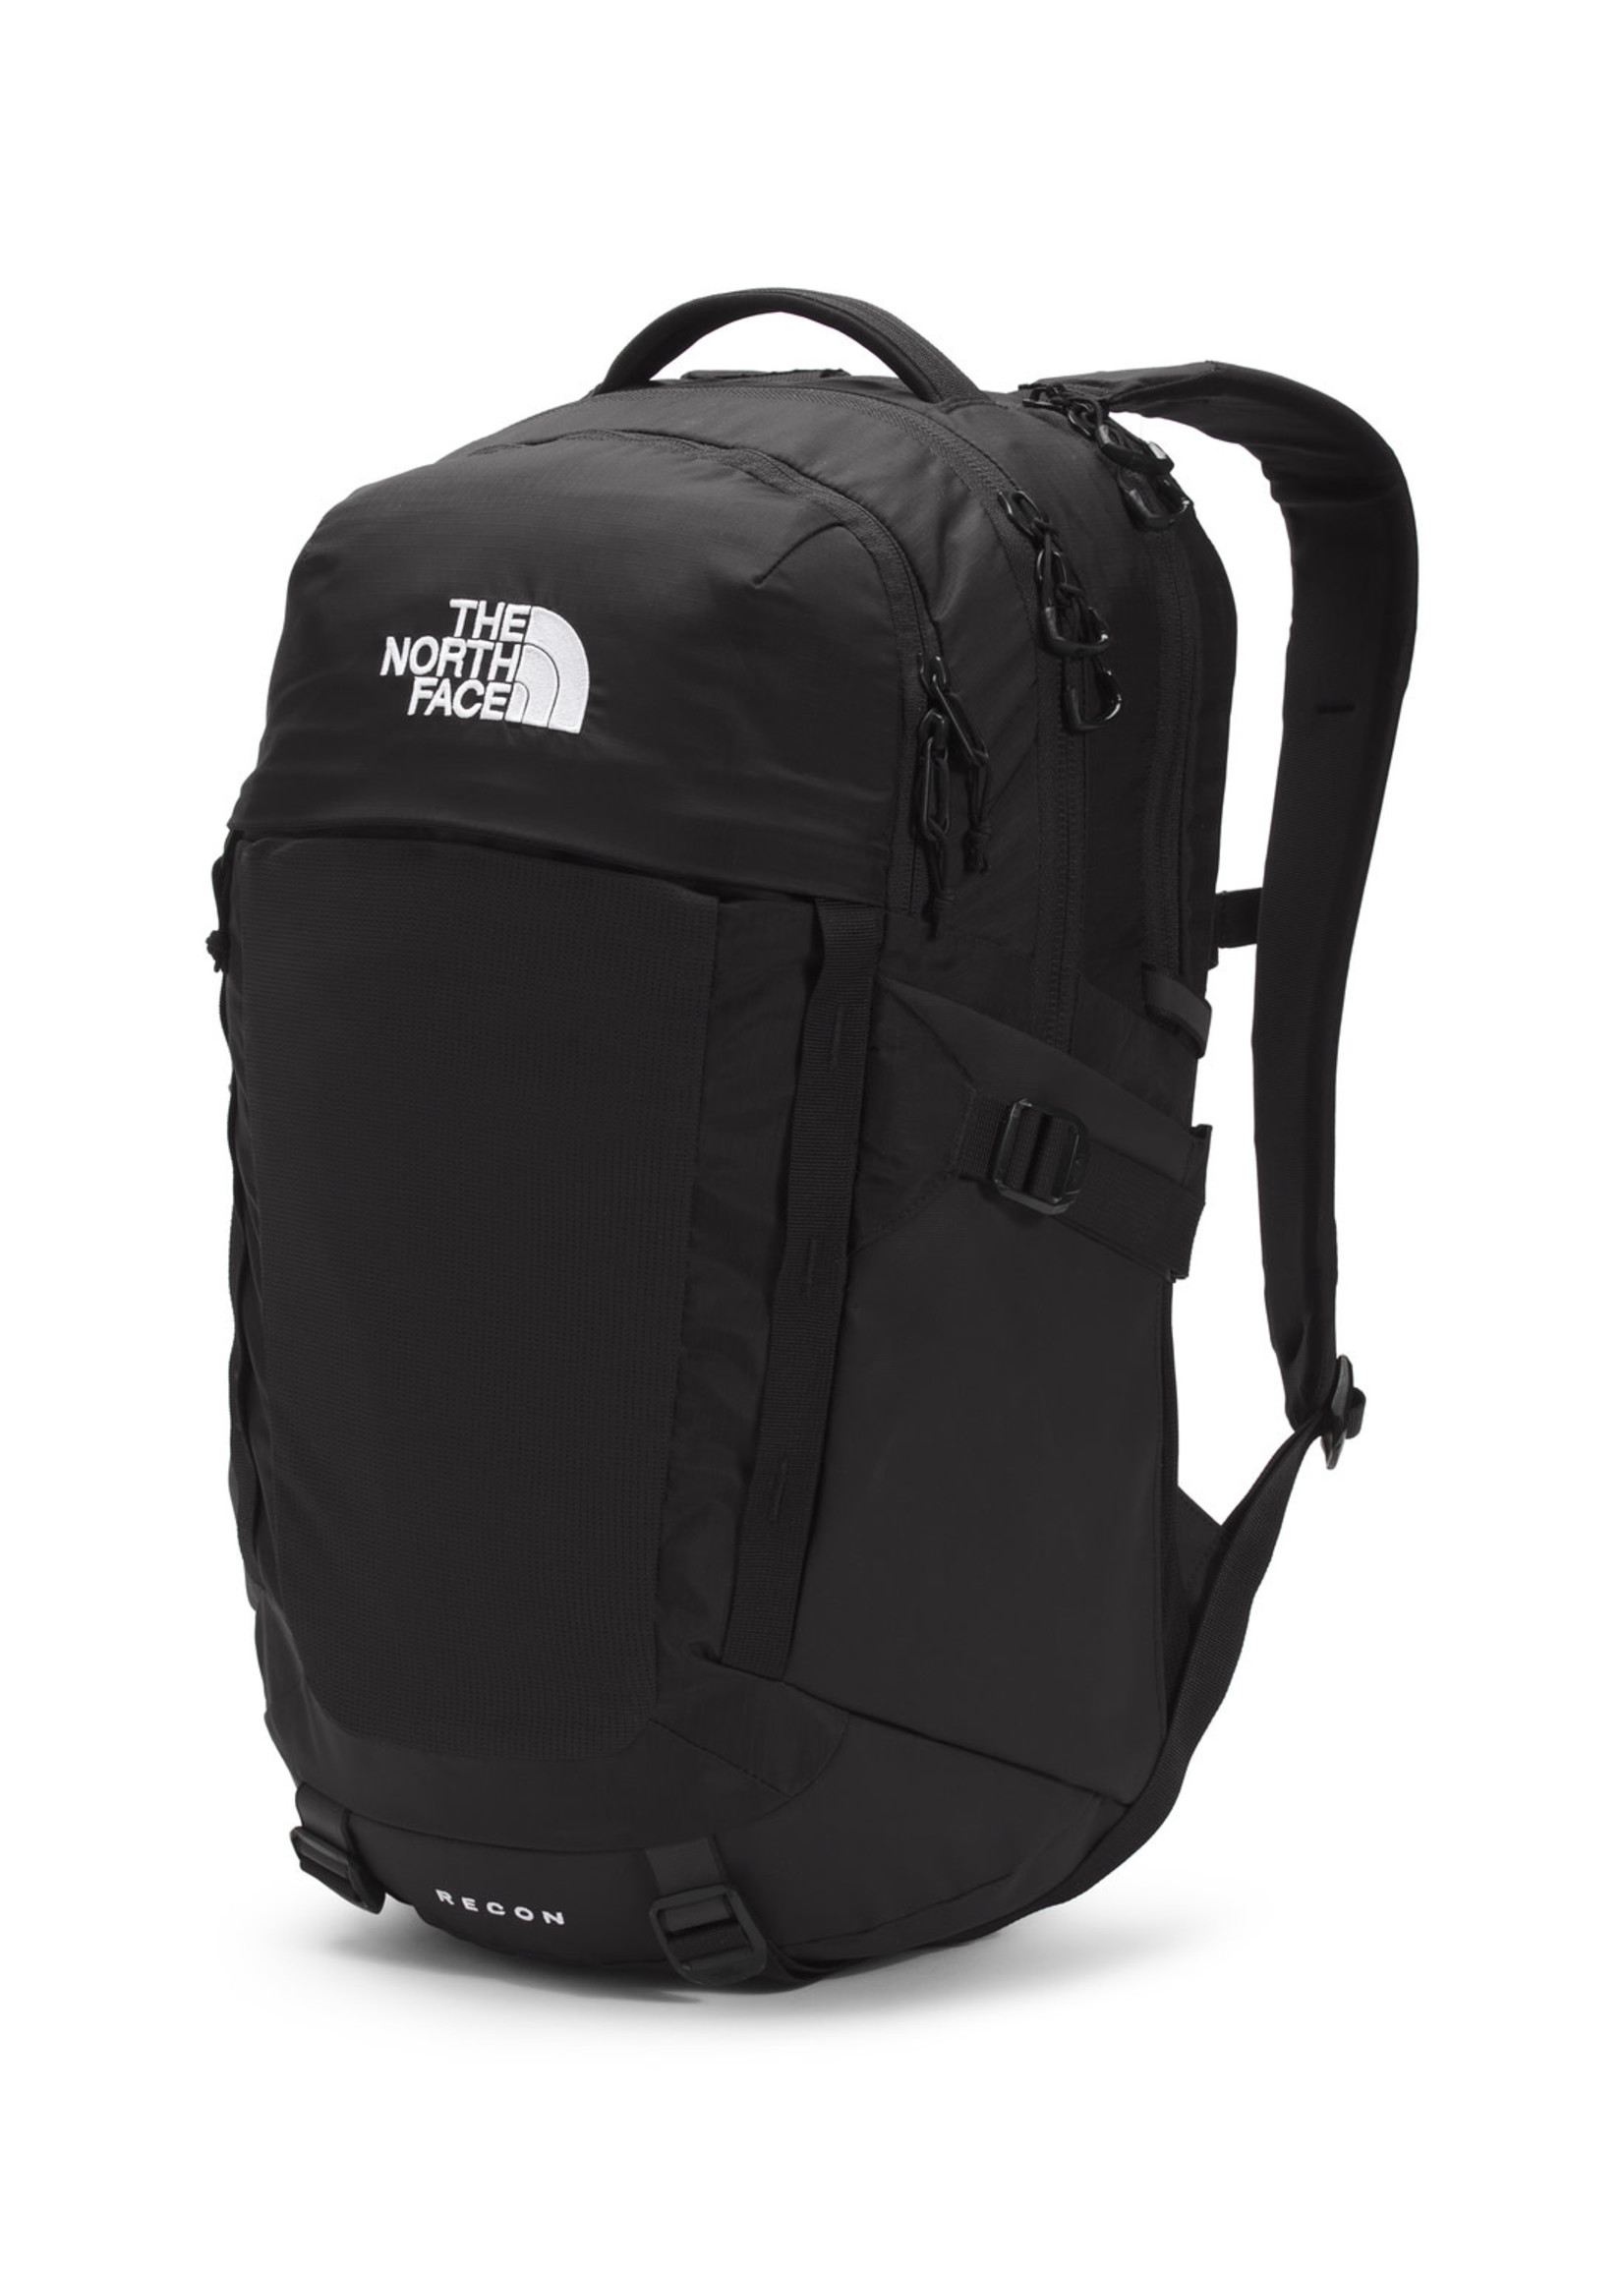 THE NORTH FACE Sac à dos Recon - femmes